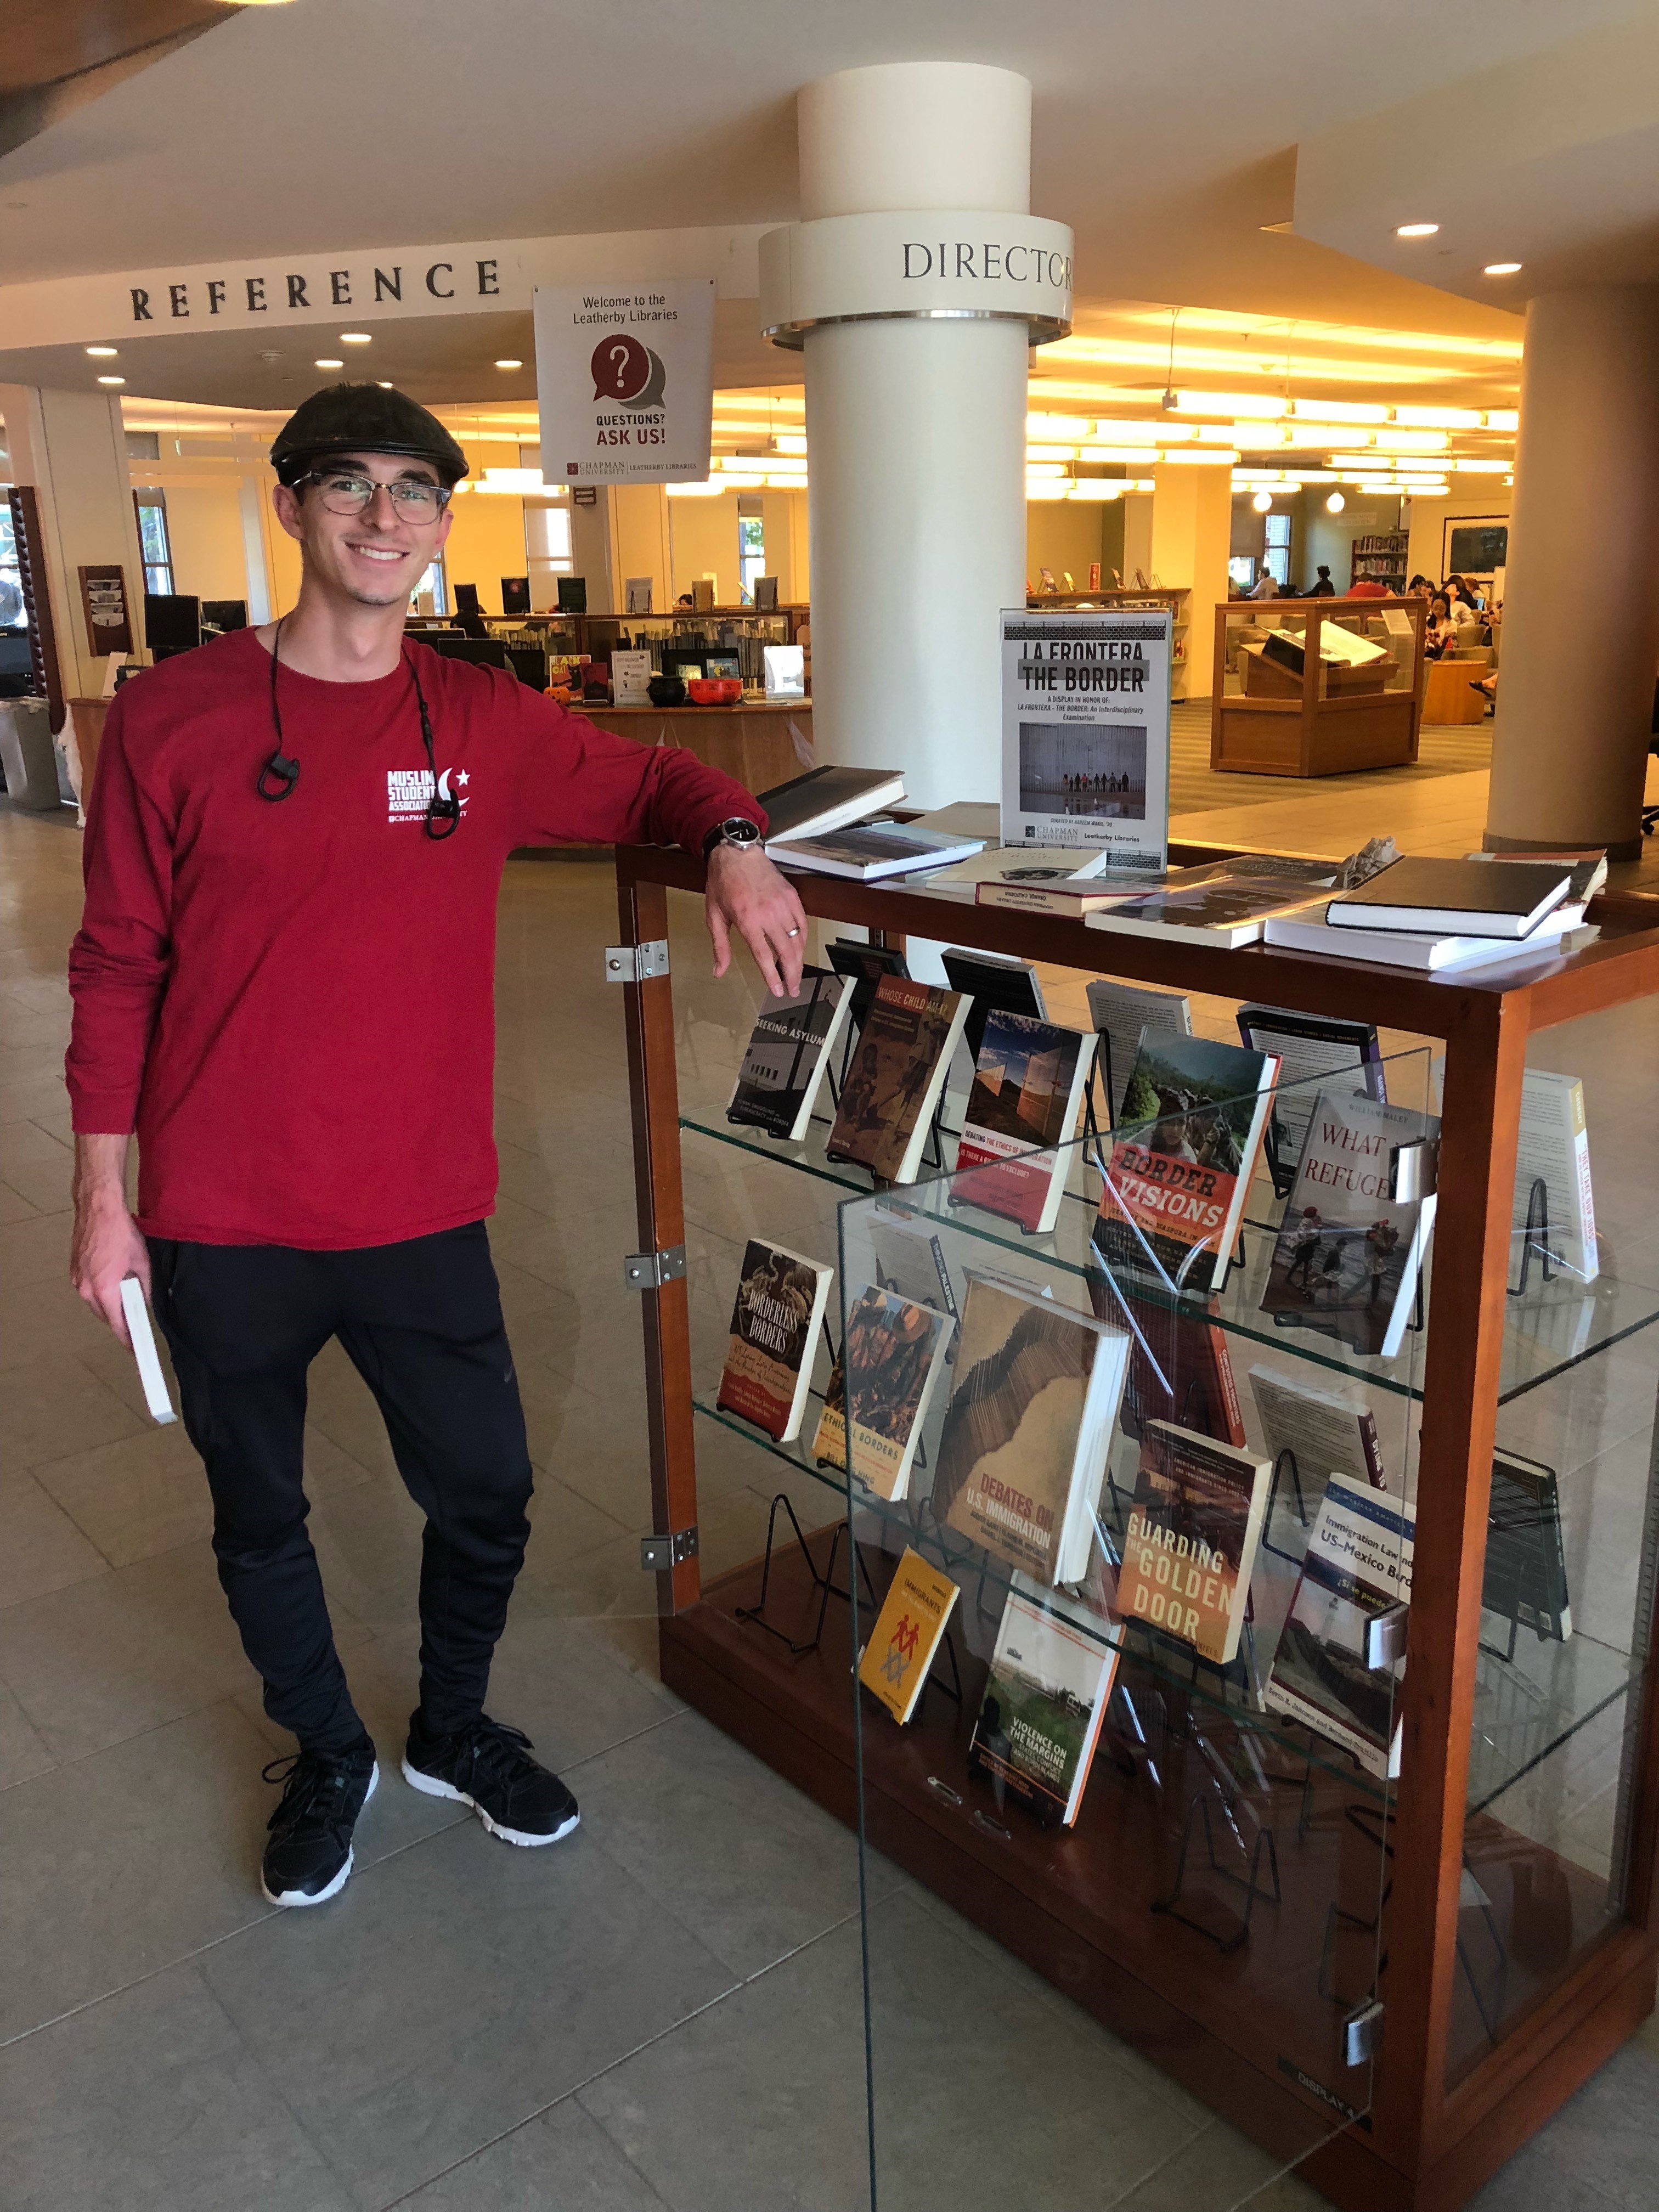 library display with student